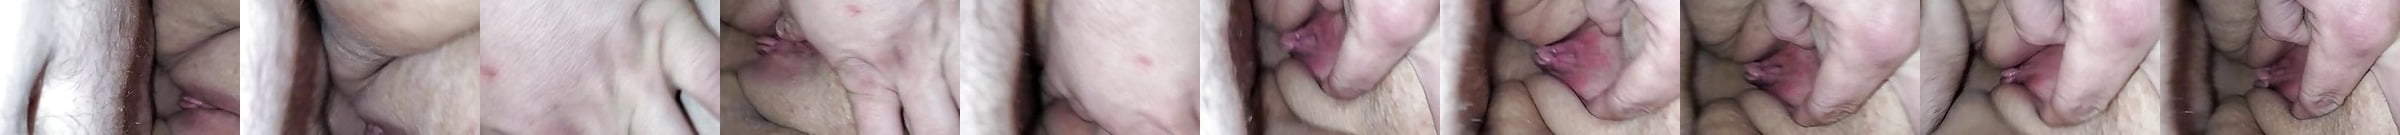 Wife Taking Thick Impregnating Creampie From Huge Cock Xhamster